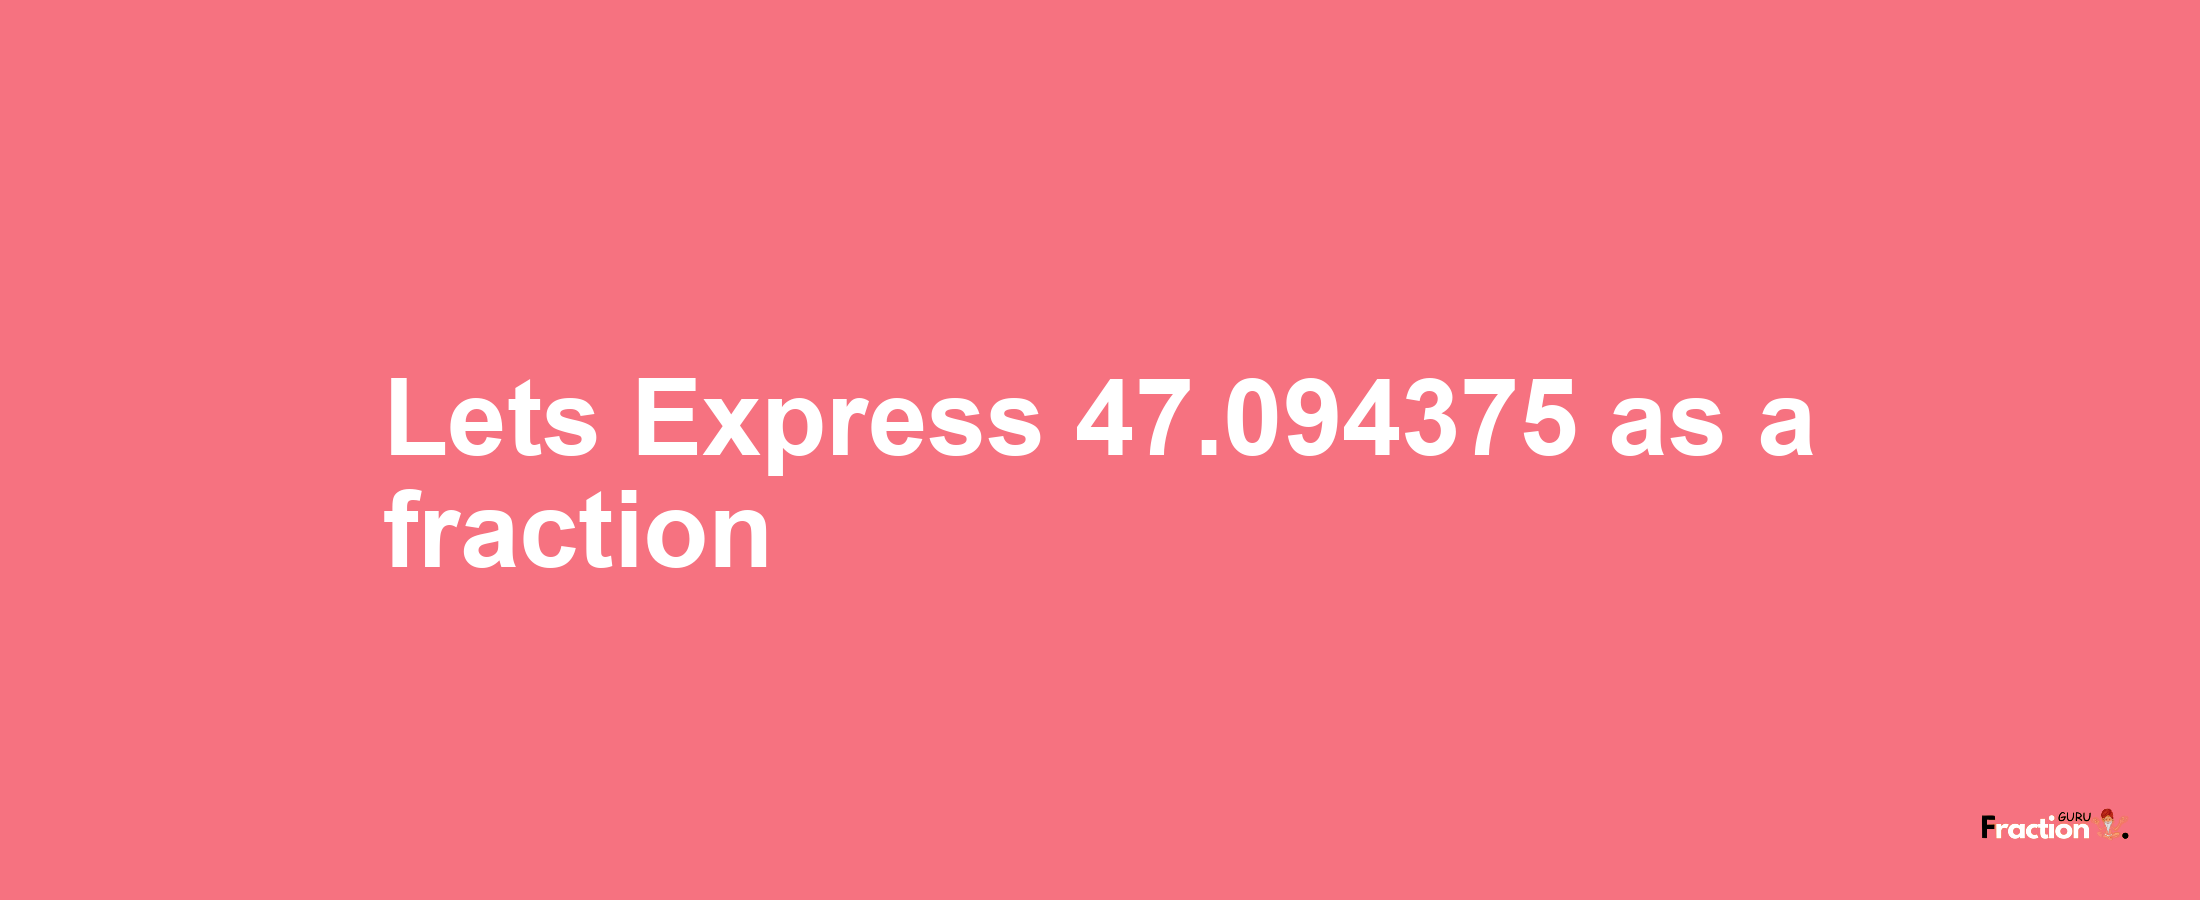 Lets Express 47.094375 as afraction